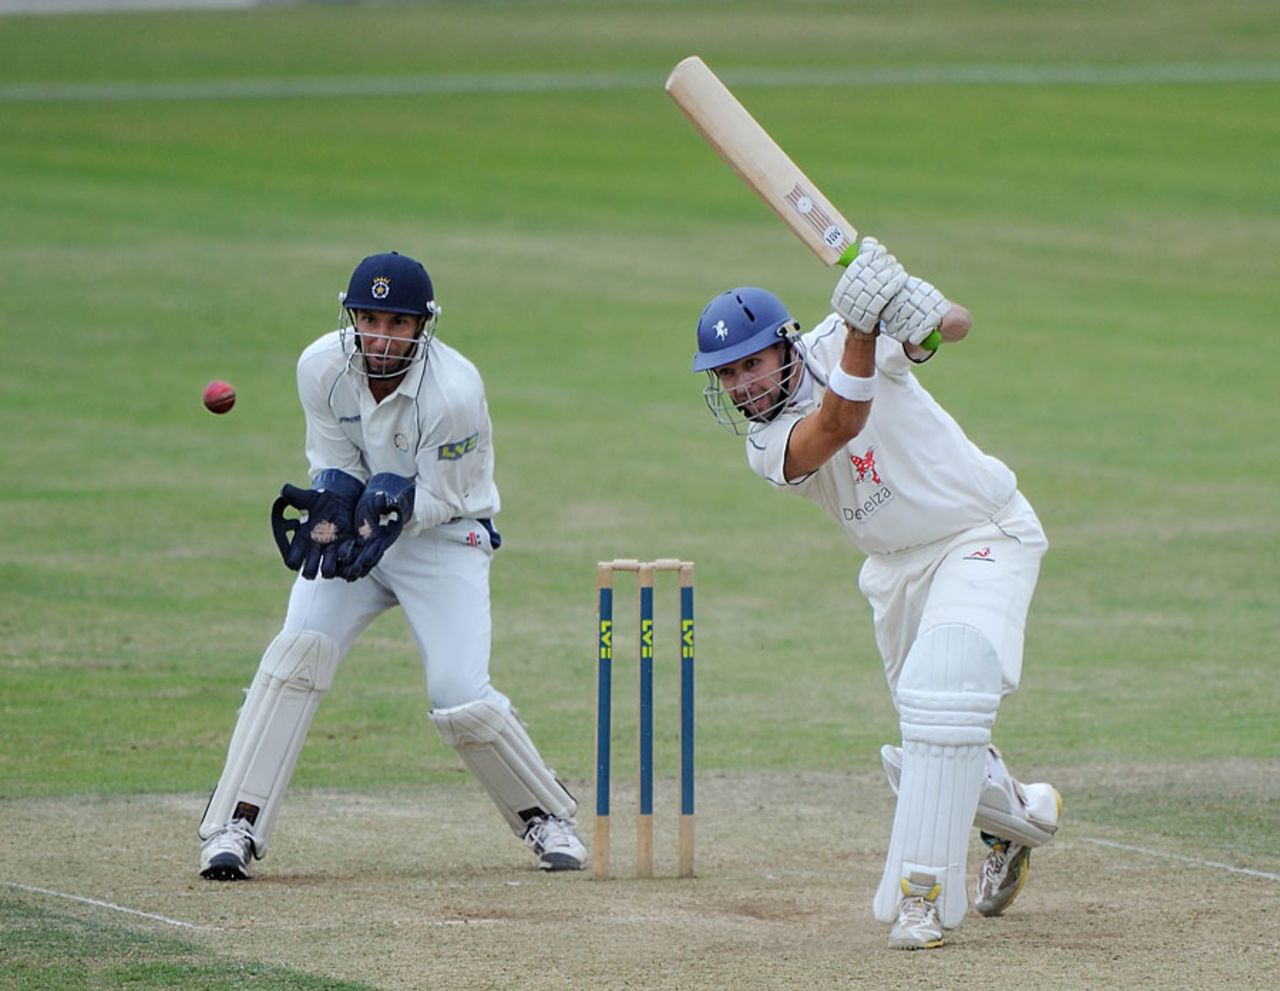 Martin van Jaarsveld provided the only resistance for Kent with an undefeated 82, Hampshire v Kent, County Championship Division One, Southampton, July 7, 2010